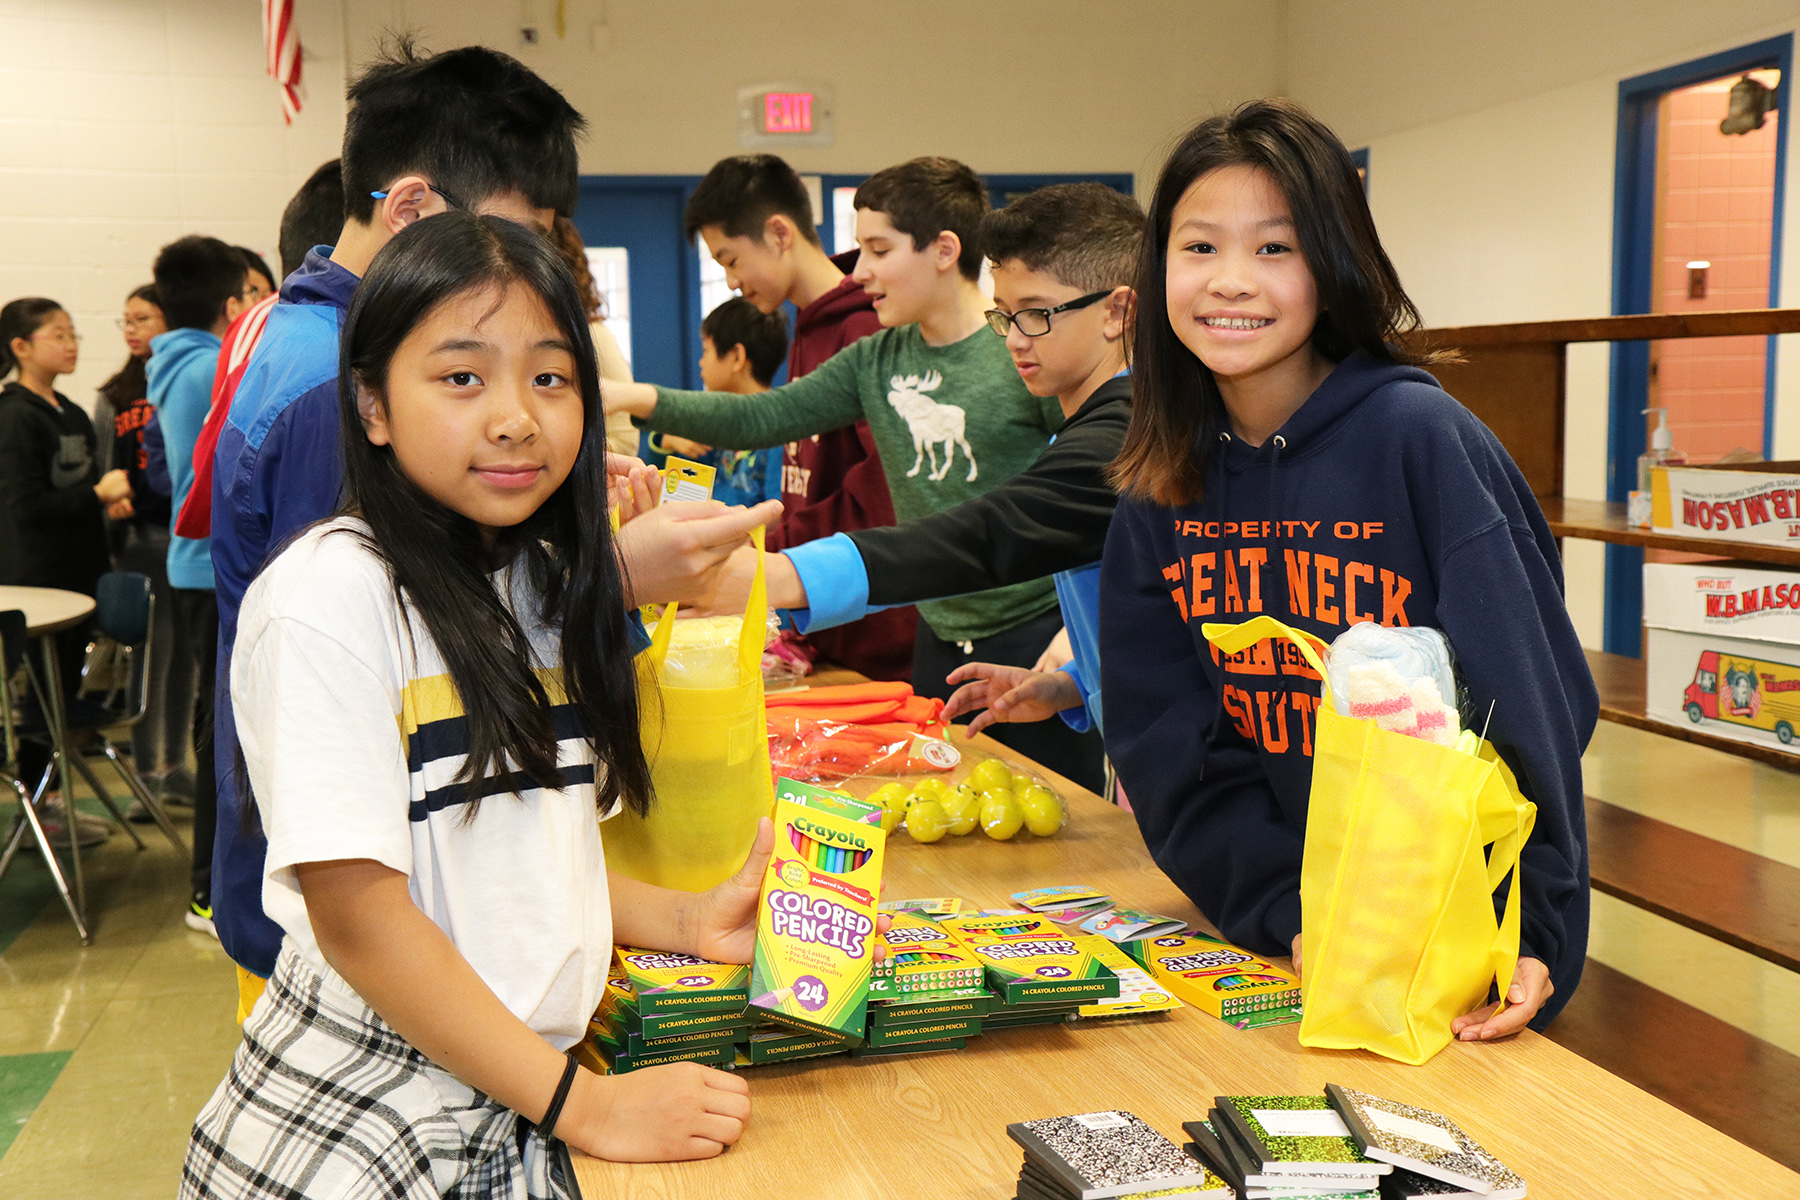 South Middle sixth graders assemble chemo care kits for pediatric cancer patients through the charity Golden Heroes. (Photo courtesy of Great Neck Public Schools)